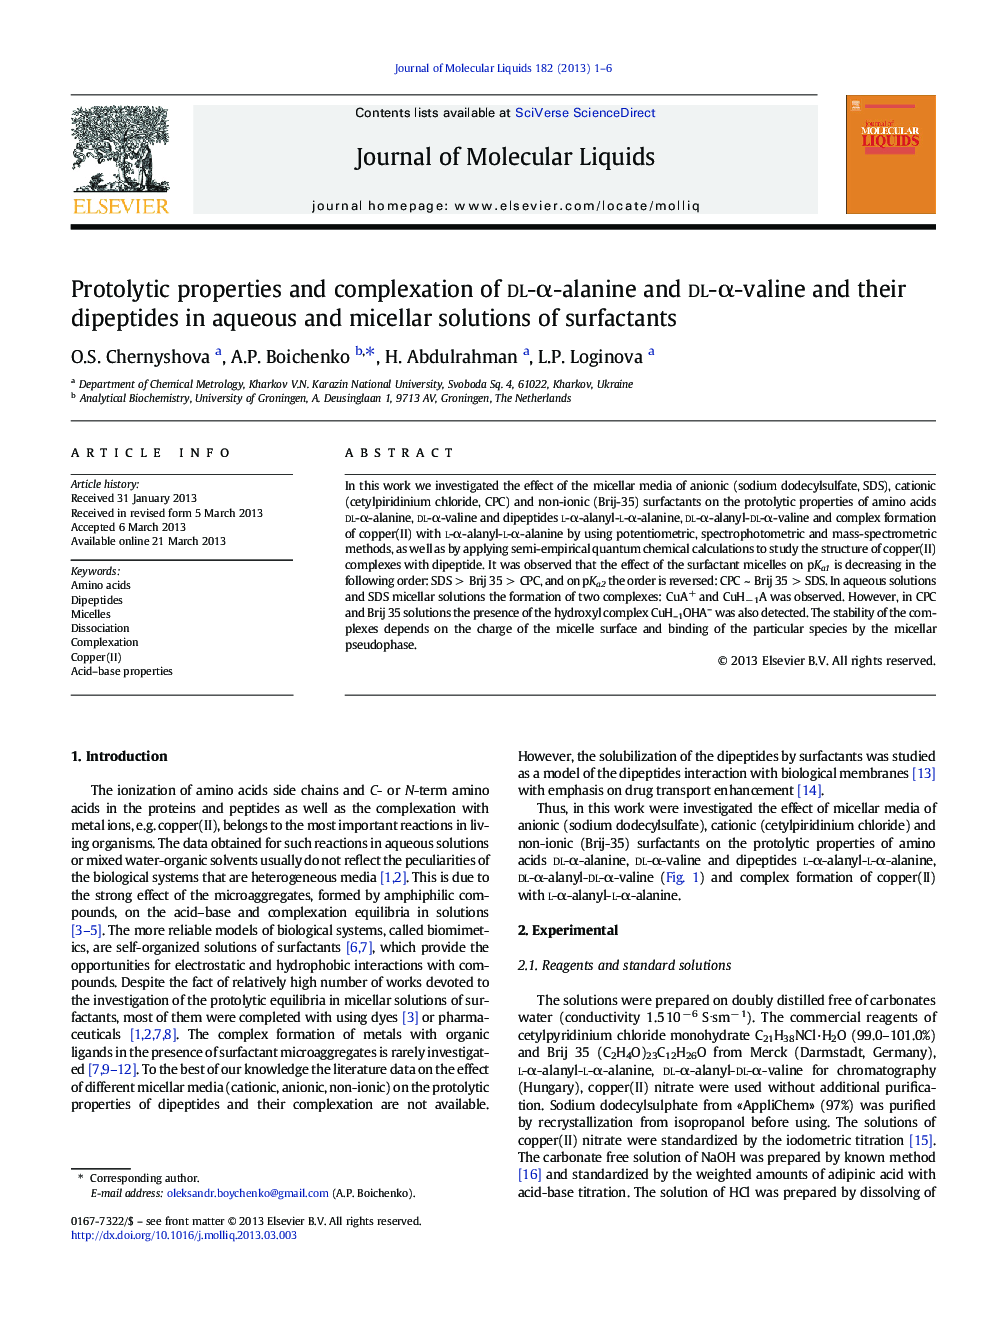 Protolytic properties and complexation of dl-Î±-alanine and dl-Î±-valine and their dipeptides in aqueous and micellar solutions of surfactants